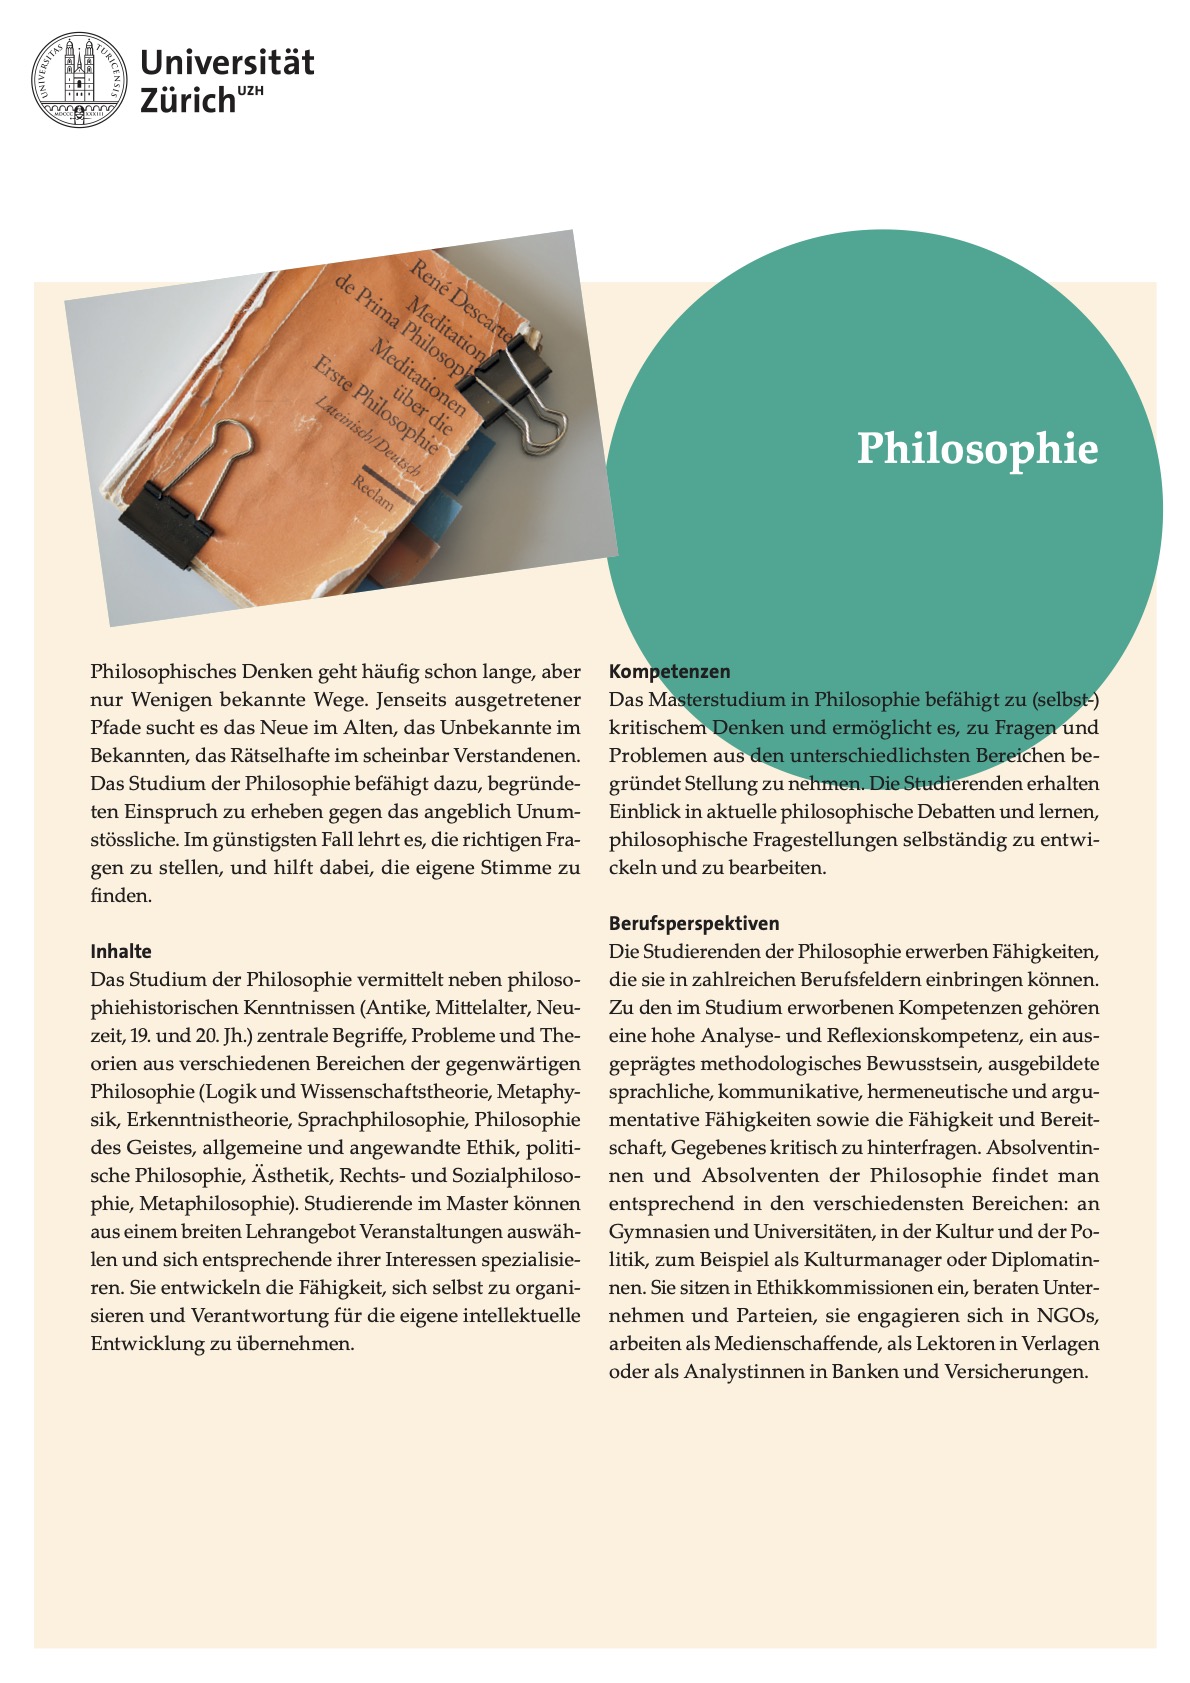 Flyer for prospective students in Philosophy